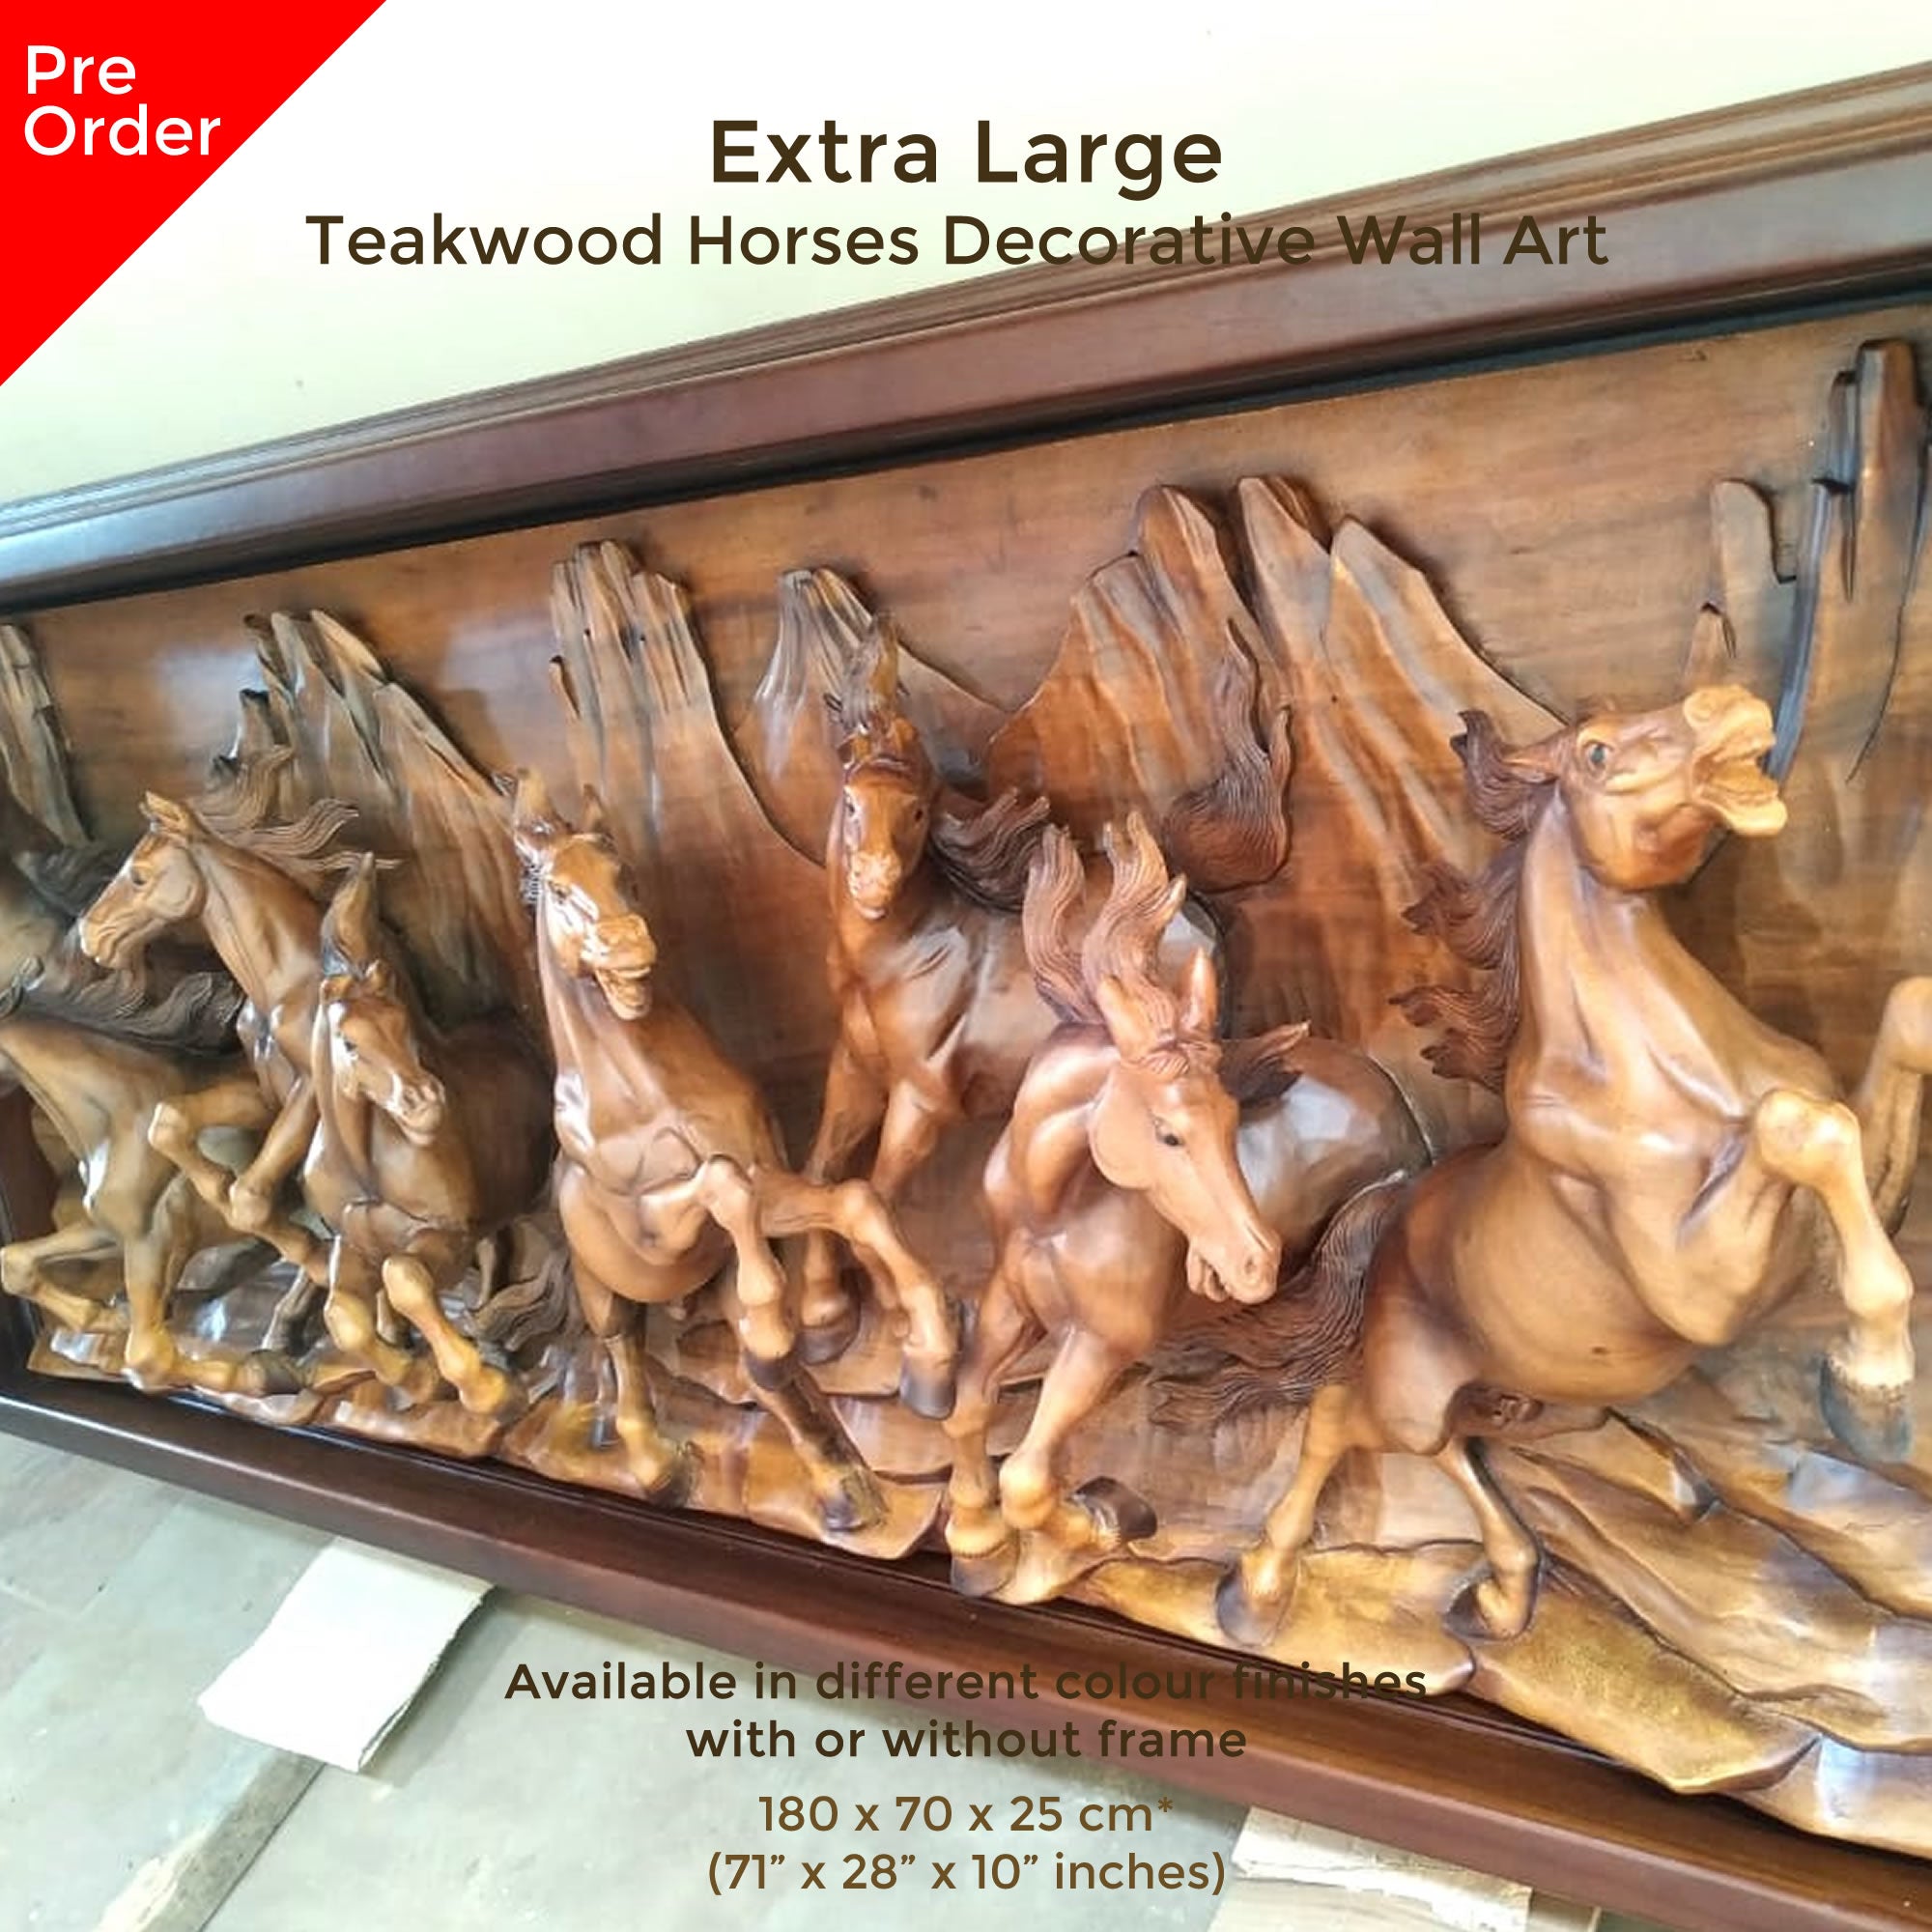 Extra large king-size teakwood hand-carved running wild horses sculpture art for a perfect backdrop in any room, hallway or as a headboard.